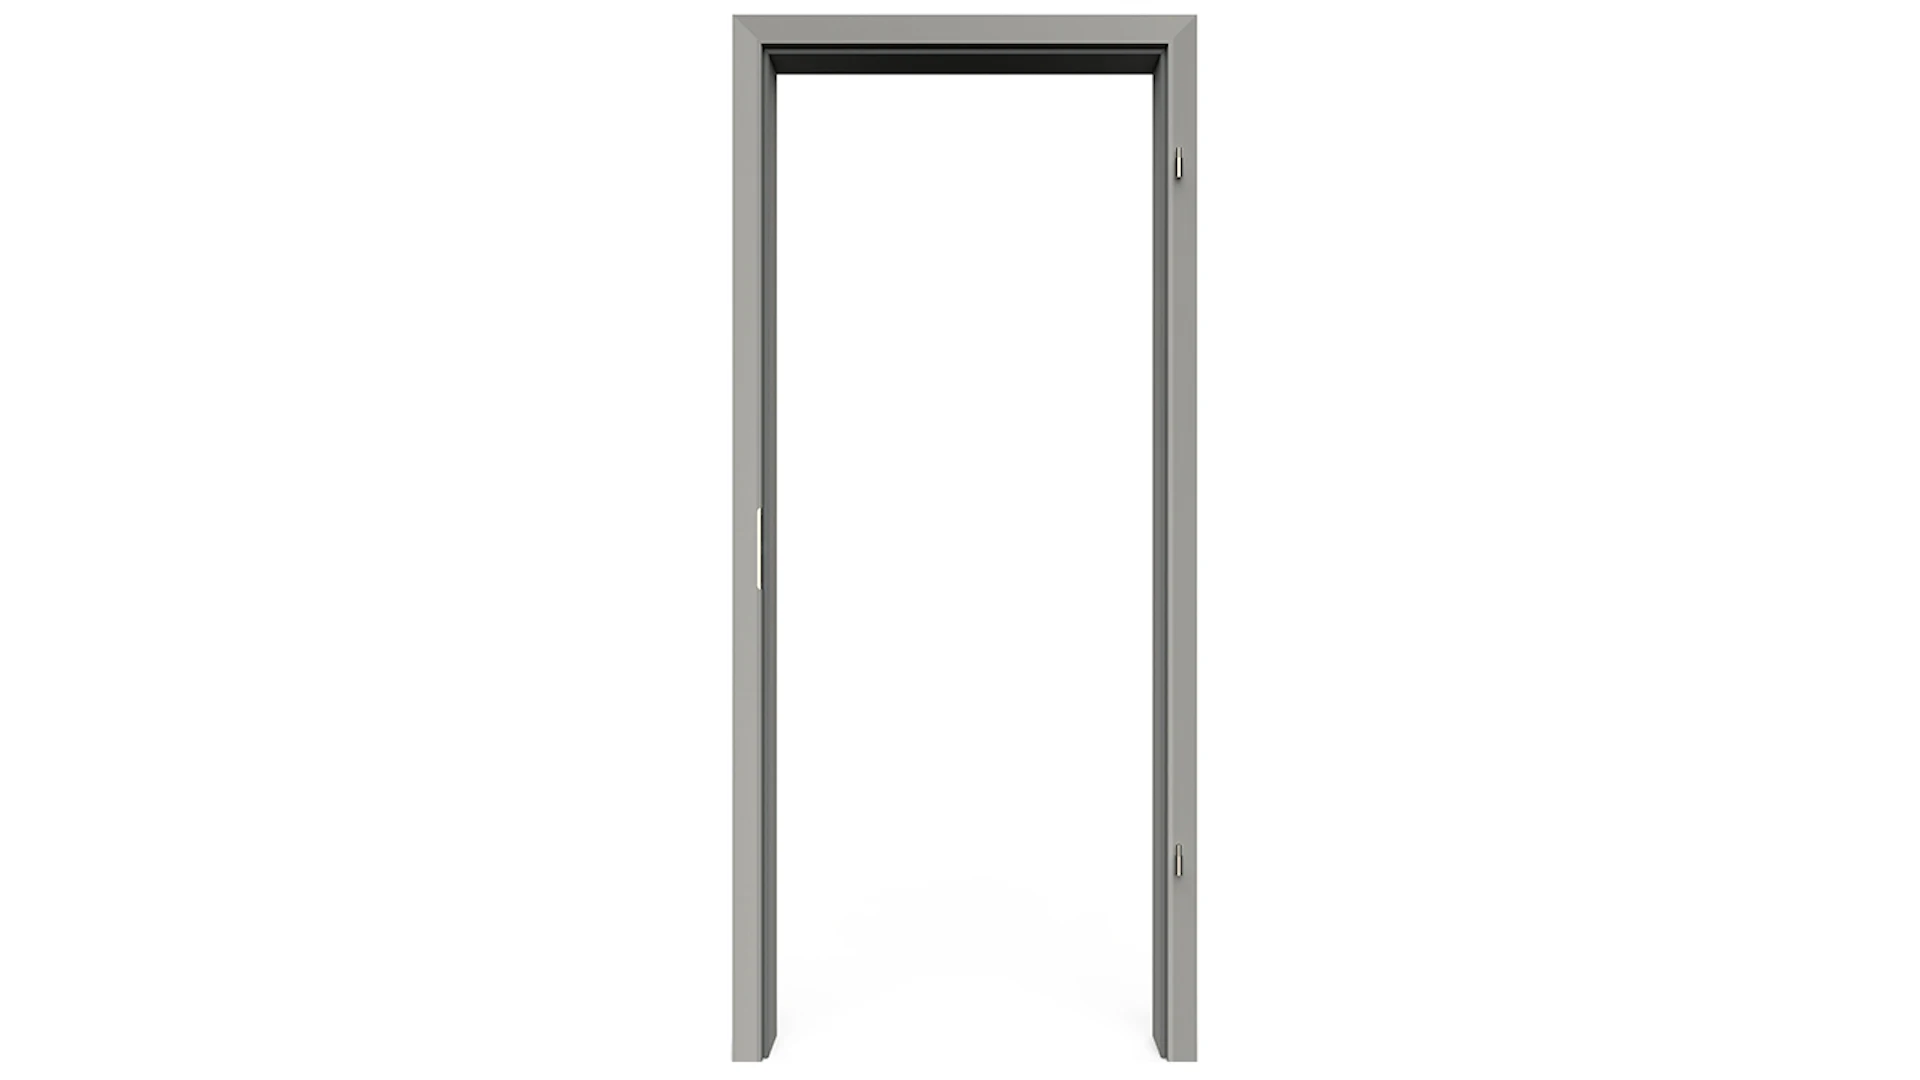 planeo Standard Door frame, rounded edge - CPL Silver grey - 1985 x 610 x 260 mm DIN Left